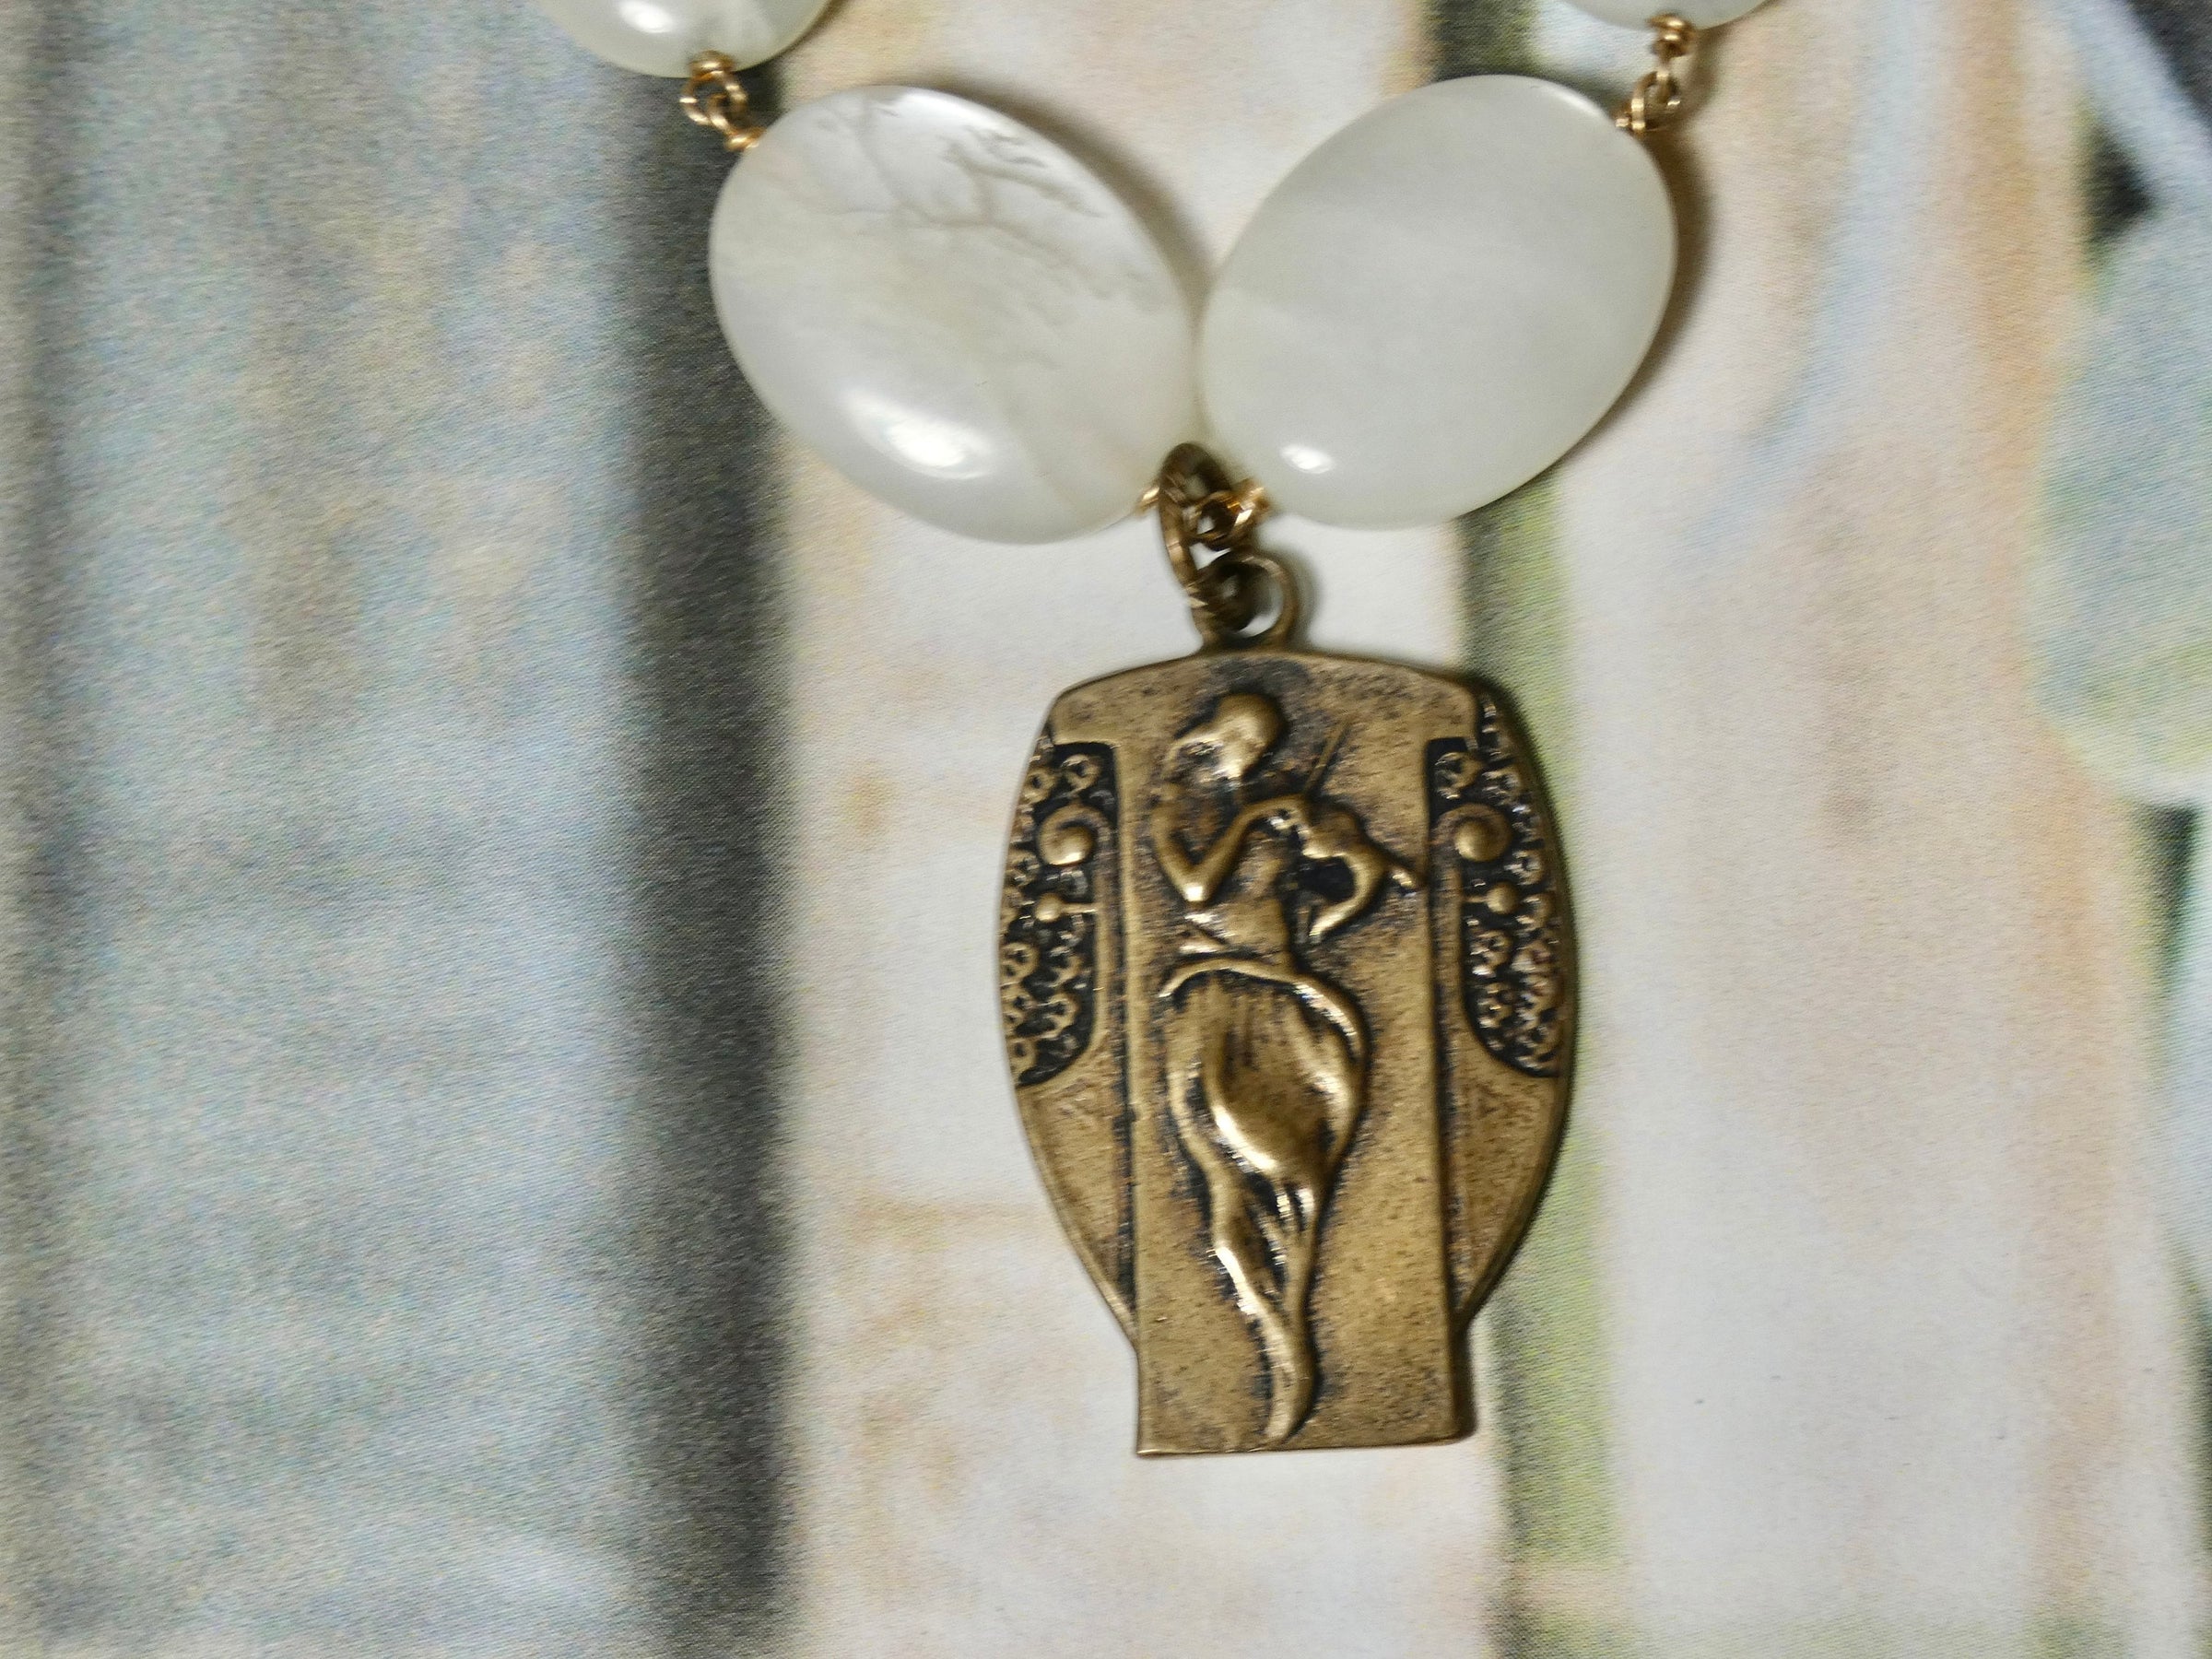 Vintage Violin Charm with Stunning Mother of Pearl Beads, One of a Kind Gift